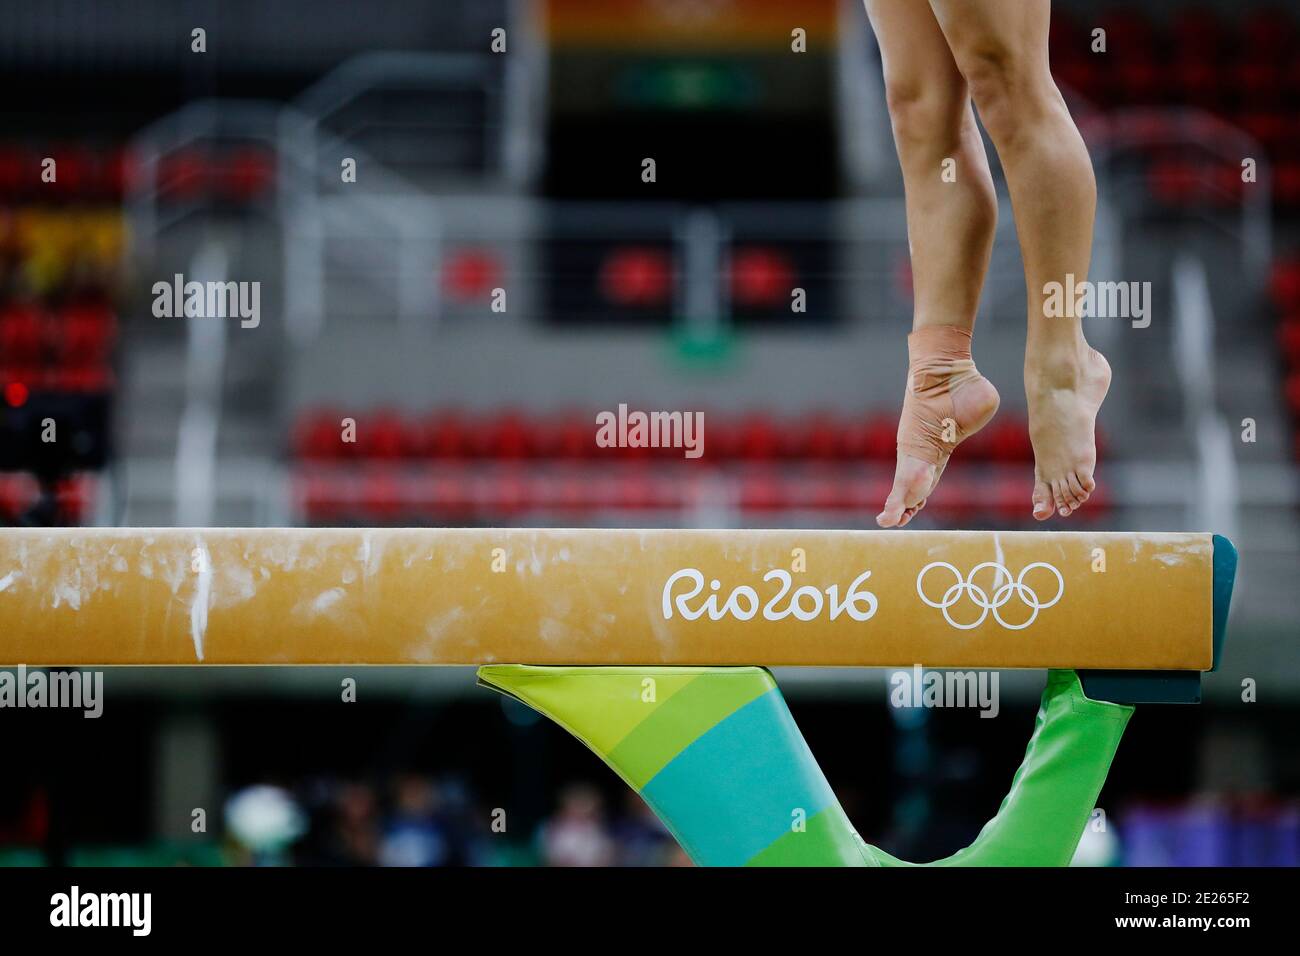 Balance beam competition at Rio 2016 Summer Olympic Games artistic gymnastics. Athlete feet during a performance training session exercise. Stock Photo